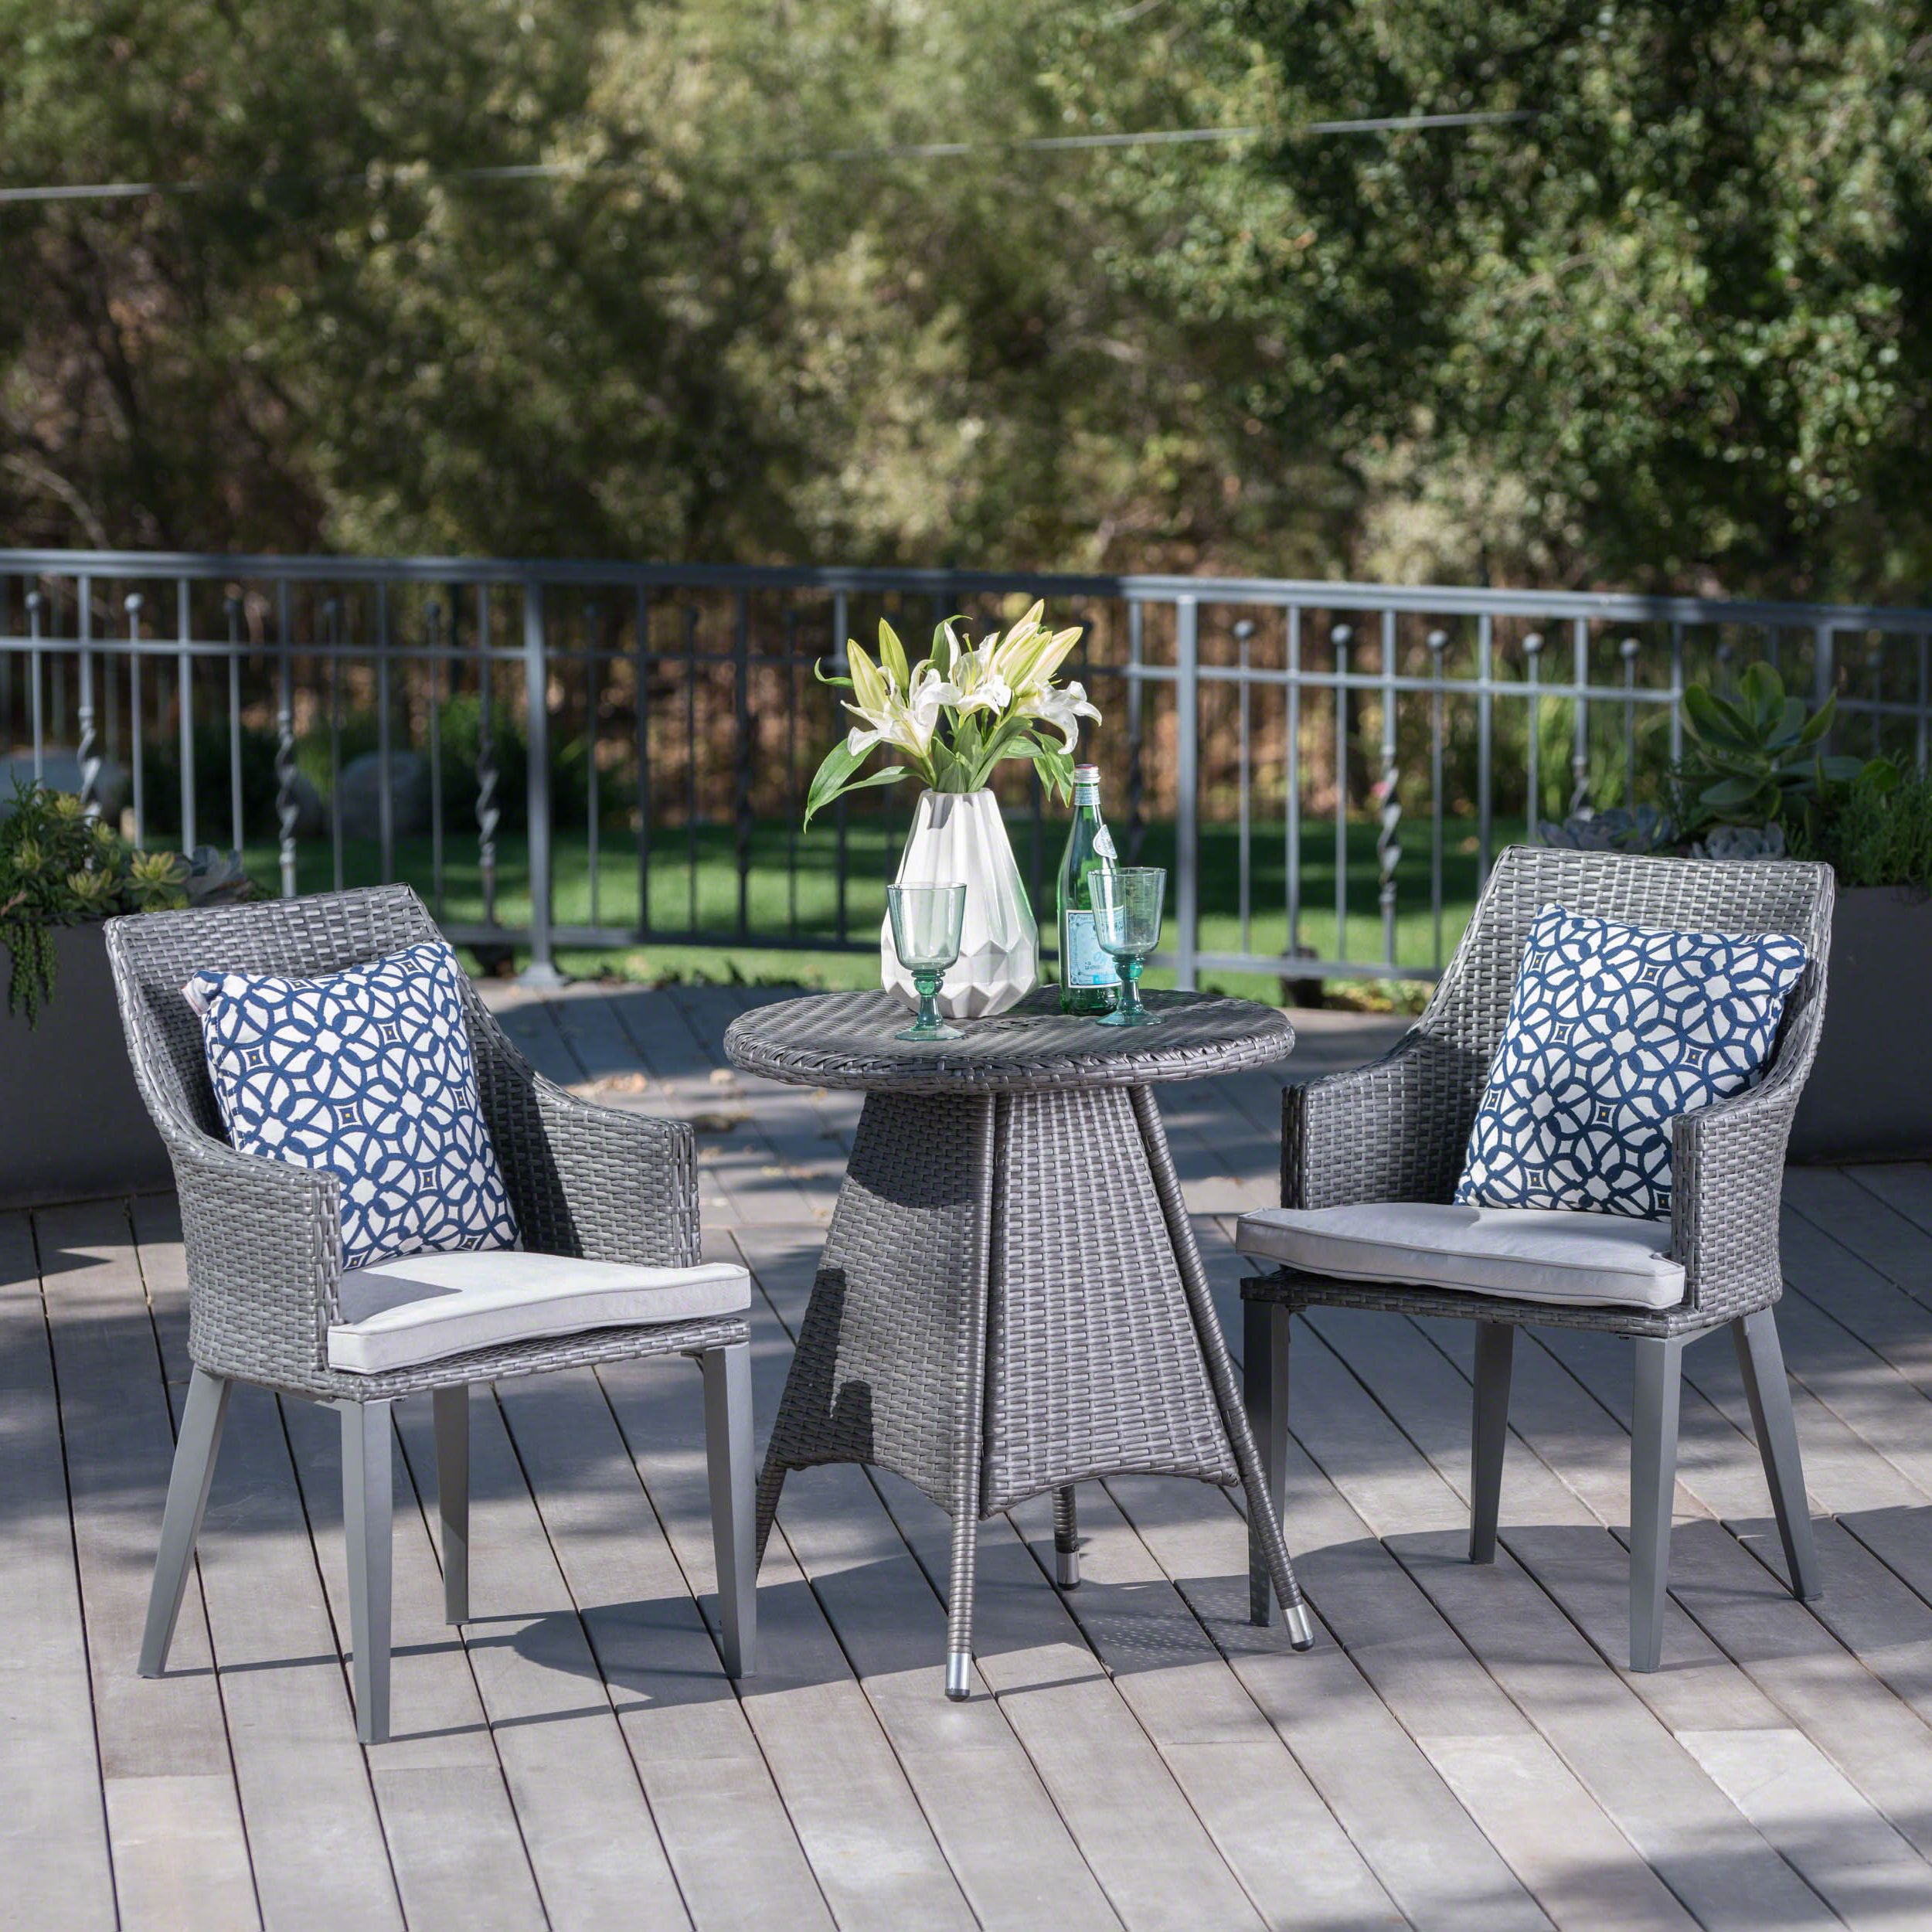 3 Piece Patio Bistro Sets Pertaining To Trendy Hillsdale Outdoor 3 Piece Wicker Round Bistro Set With Cushions, Grey (View 1 of 15)